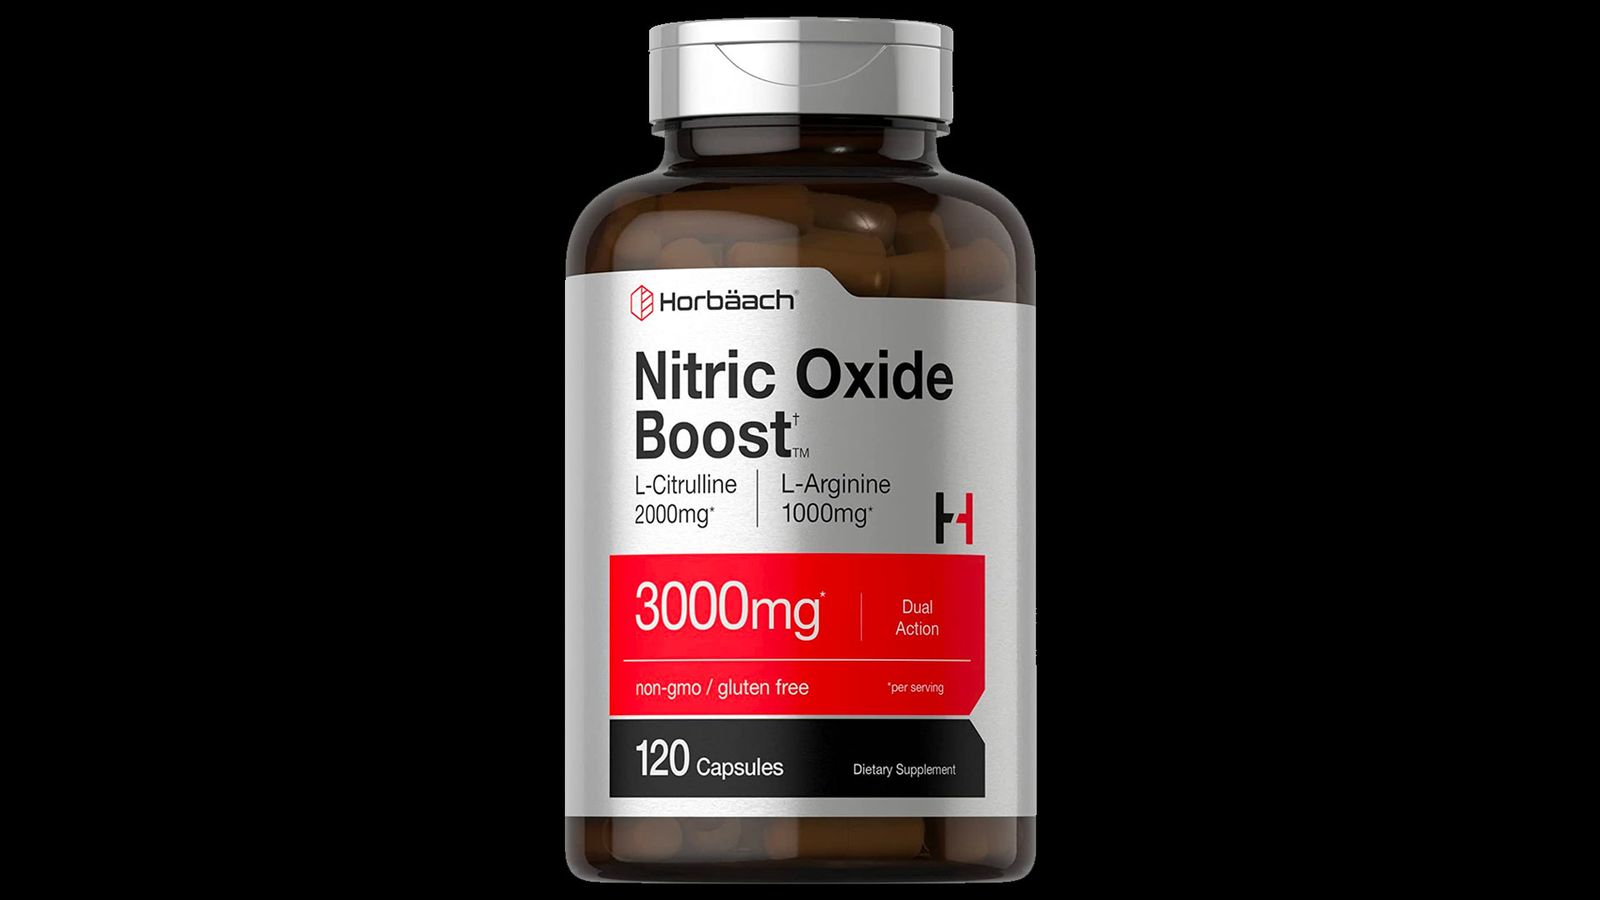 Horbäach Nitric Oxide Max product image of a brown container with silver and red branding.